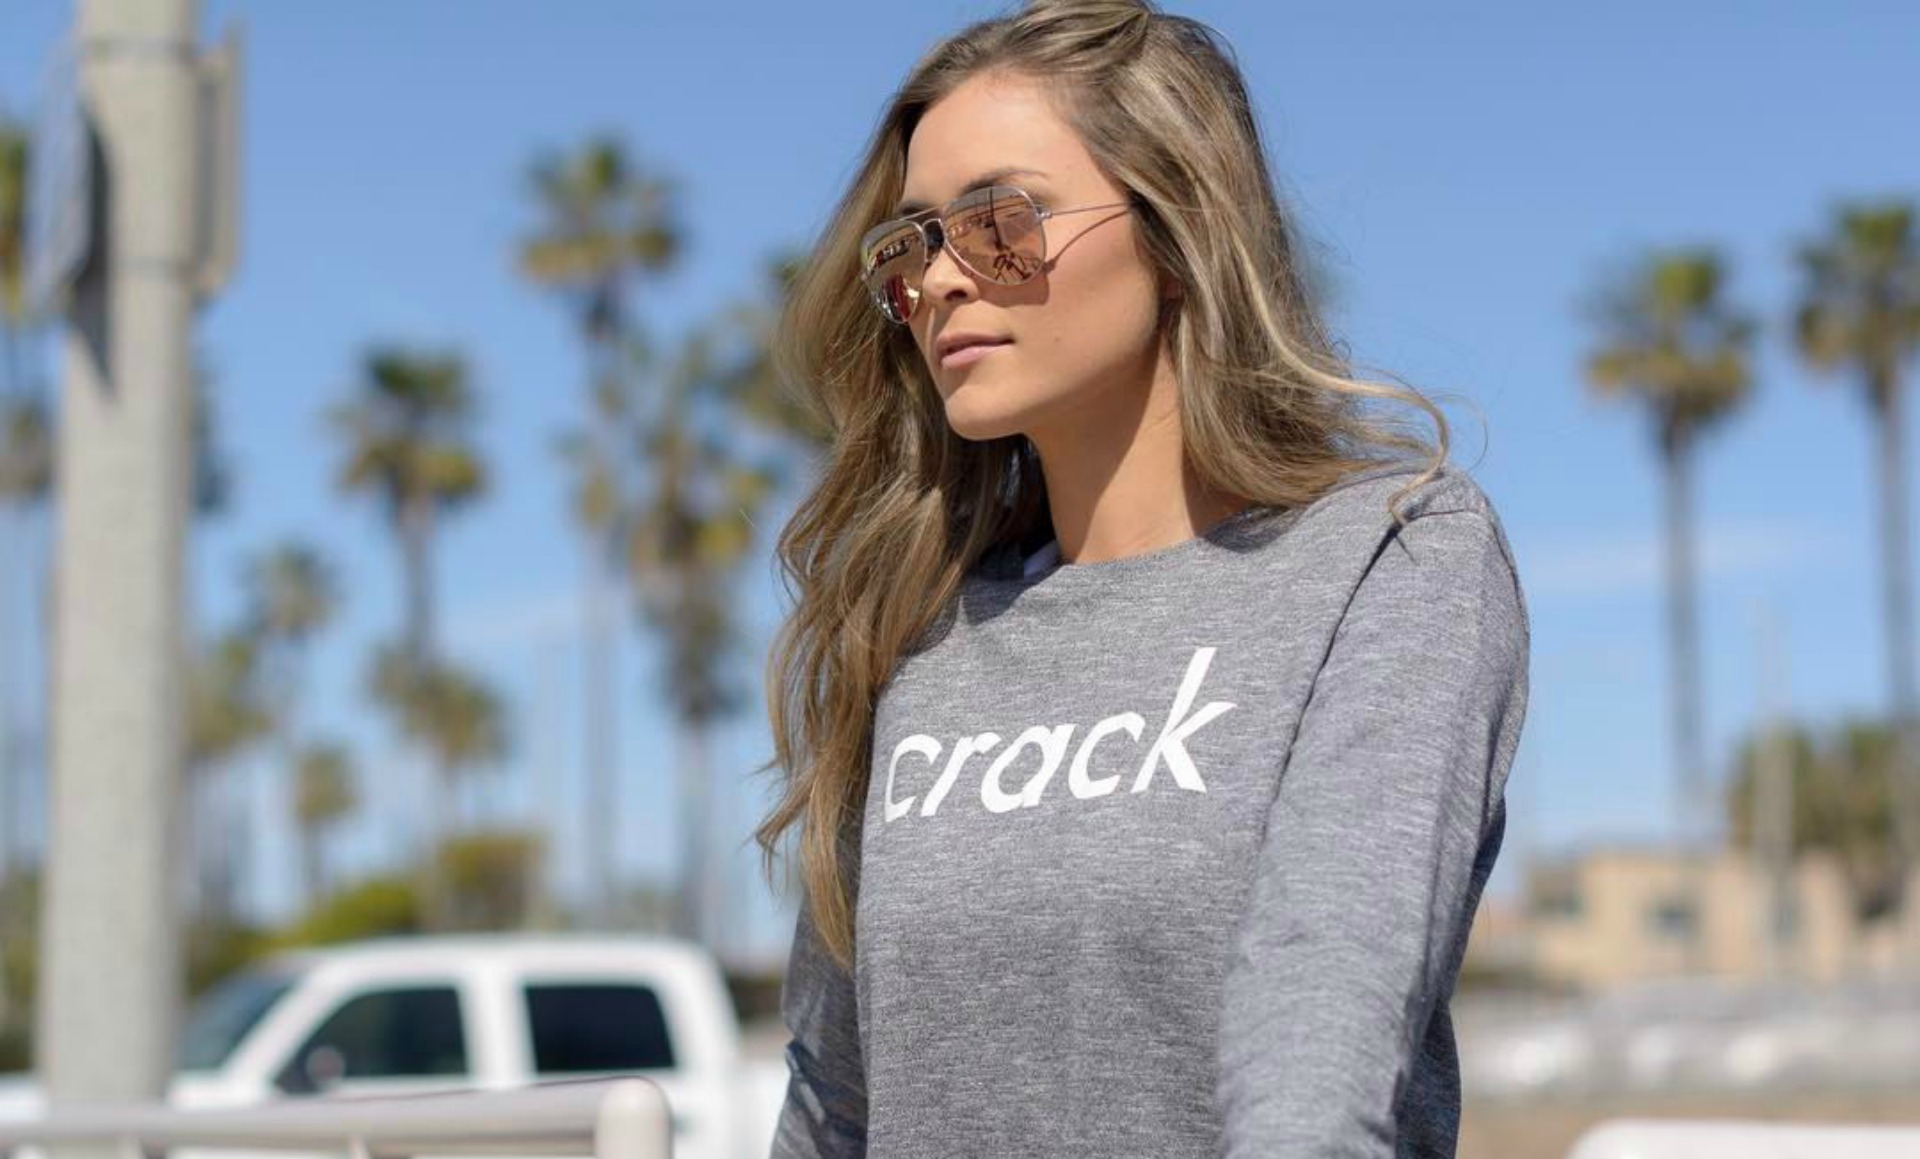 Crack FC Provides Inspired Lifestyle Apparel for Football Lovers